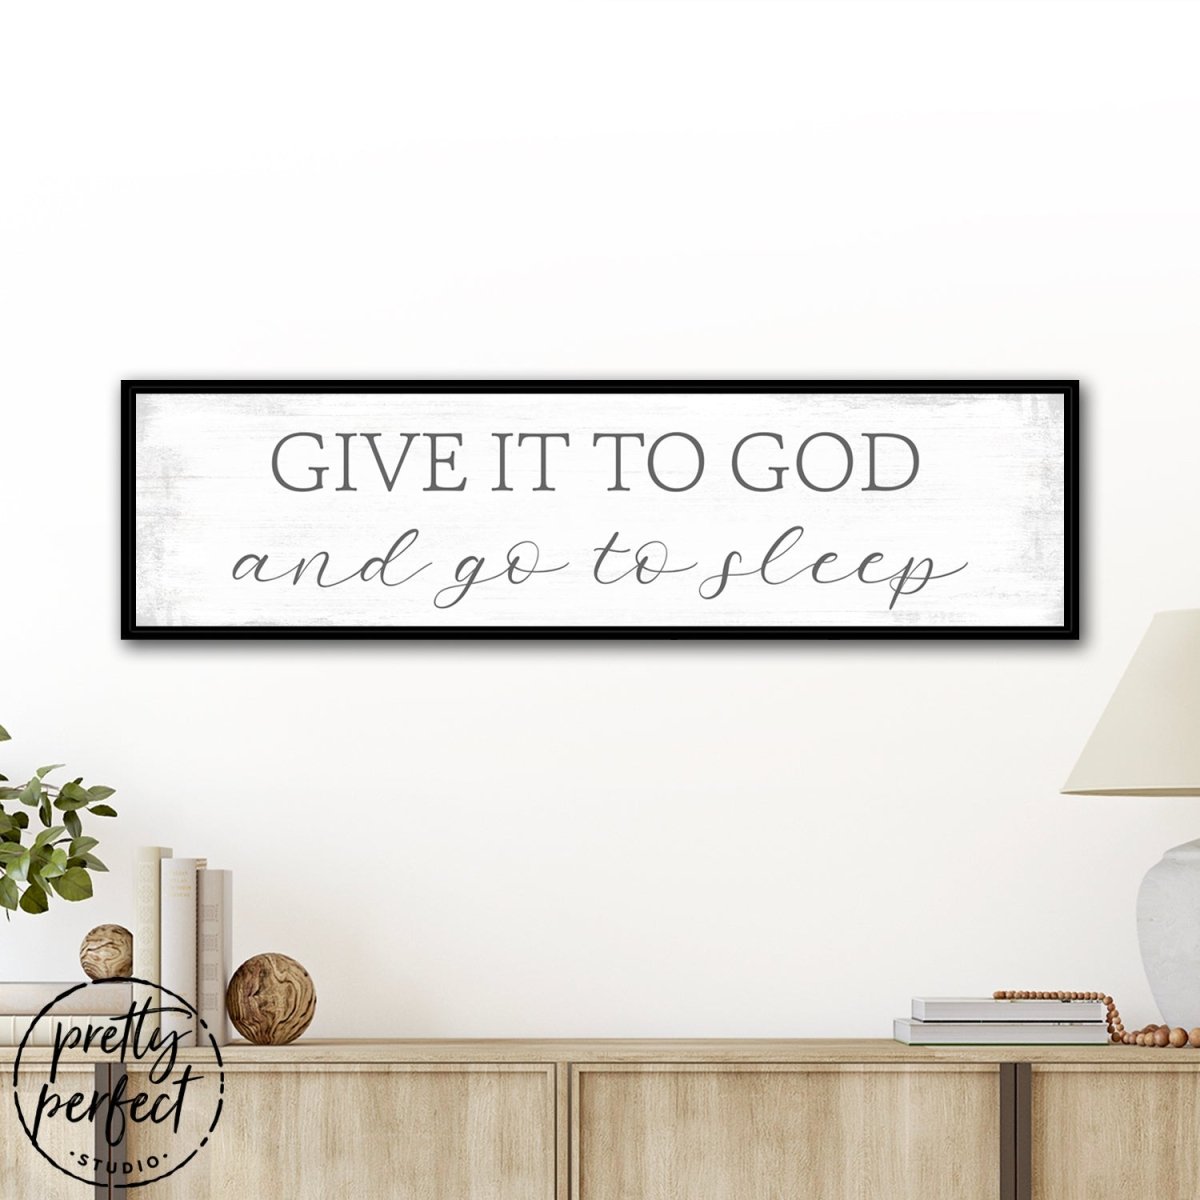 Give It To God and Go To Sleep Sign Above Table in Living Room - Pretty Perfect Studio